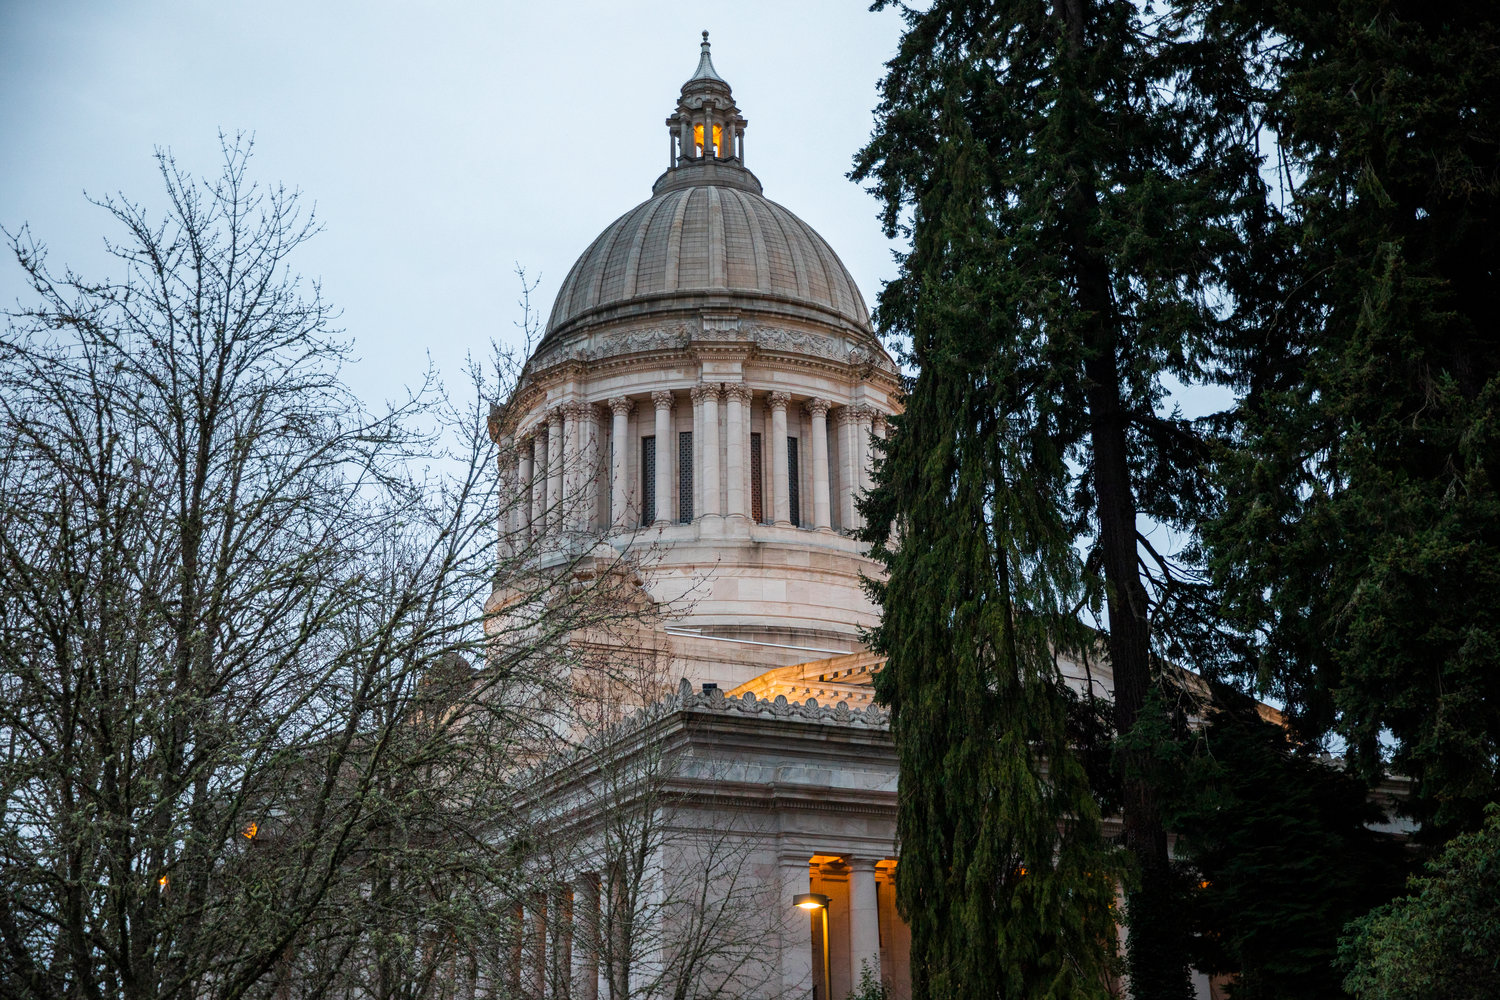 The Capitol building in Olympia, home to the Senate and House chambers, is seen from outside the Governor’s Mansion Thursday, Feb. 16.